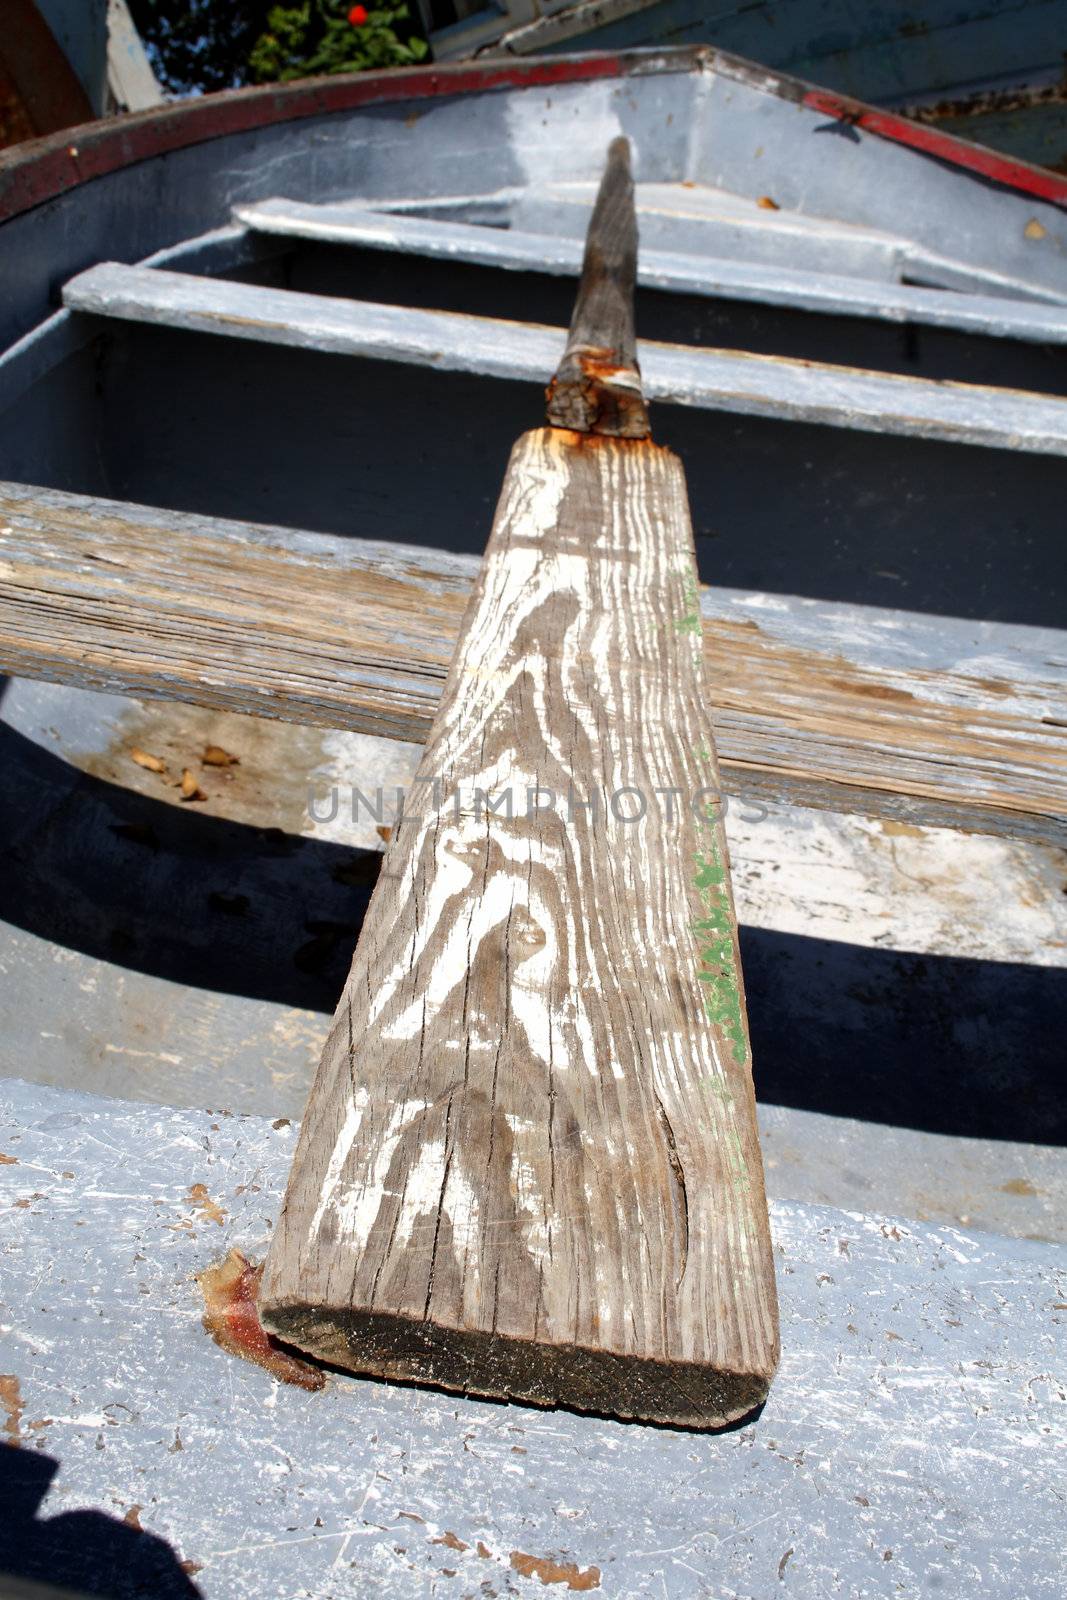 Old row boat with a worn oar.